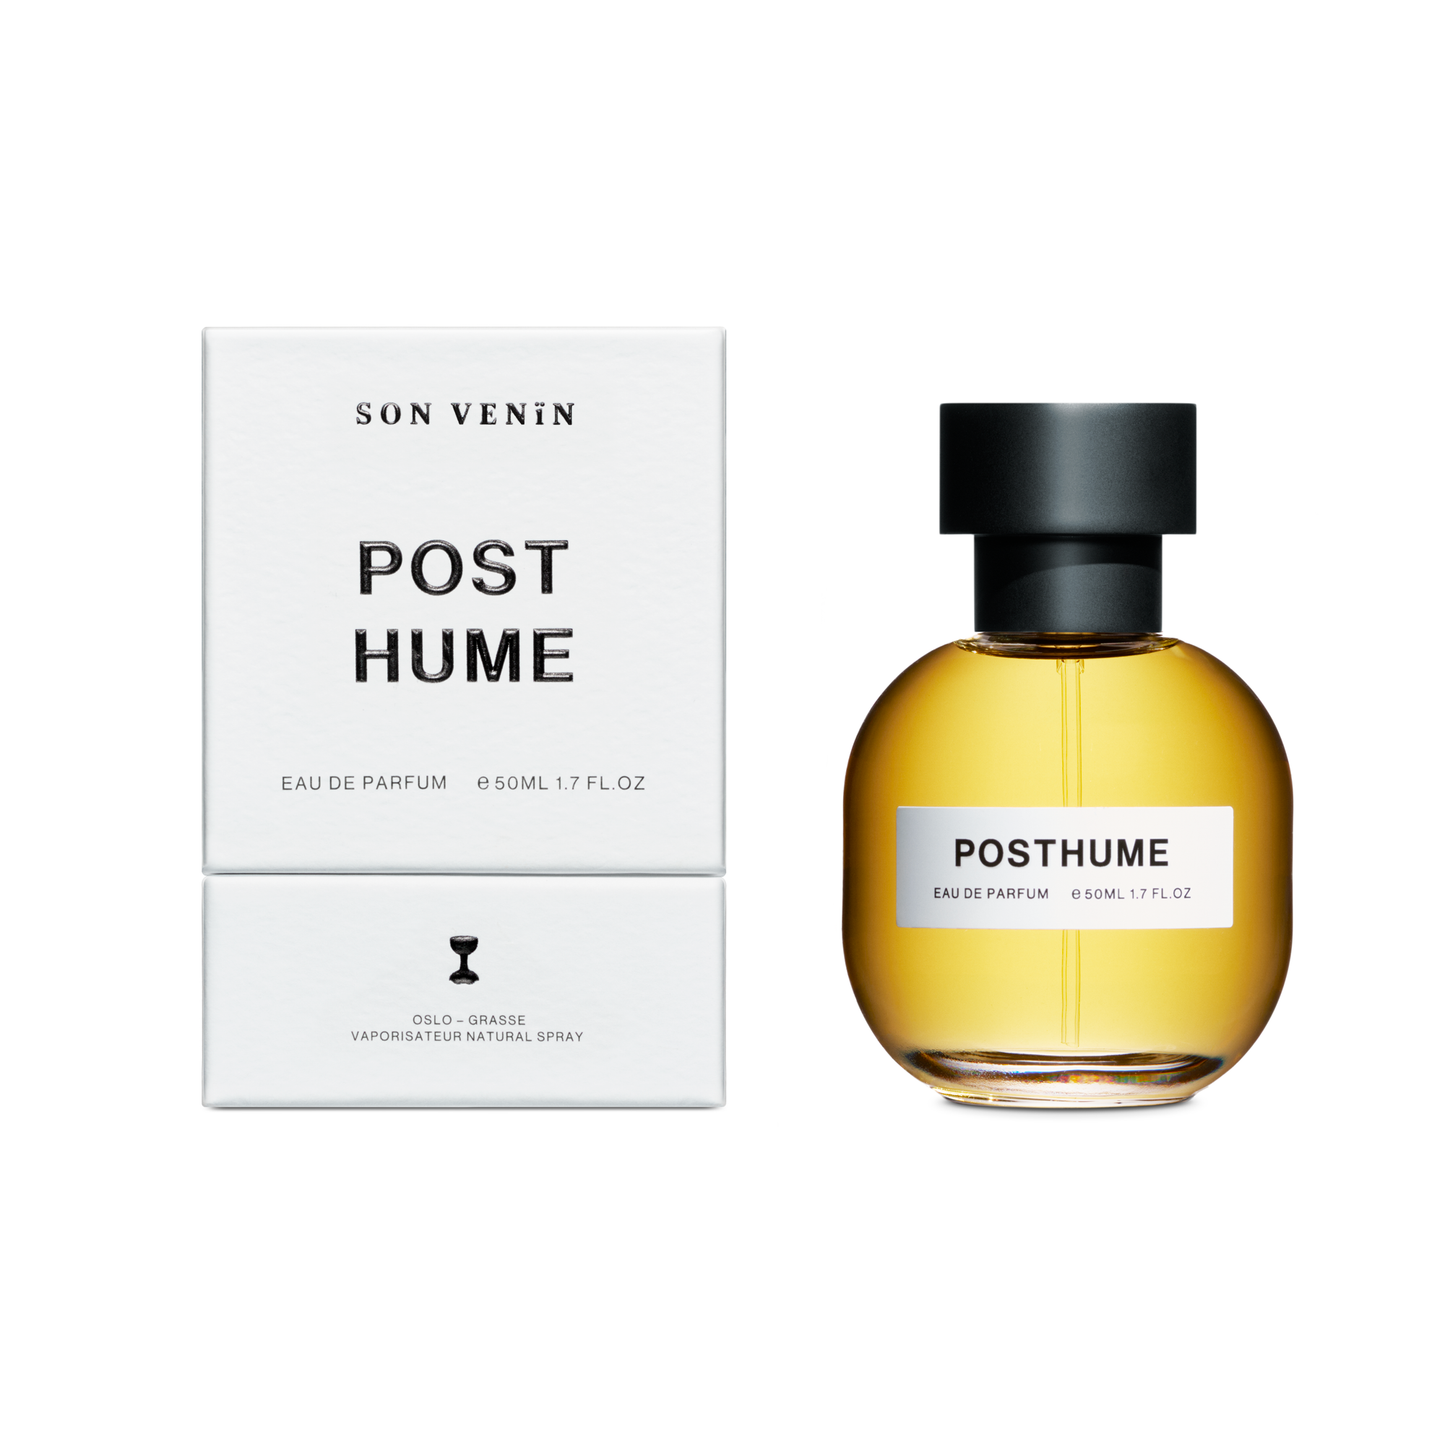 Son Venin POSTHUME Bottle and Packaging